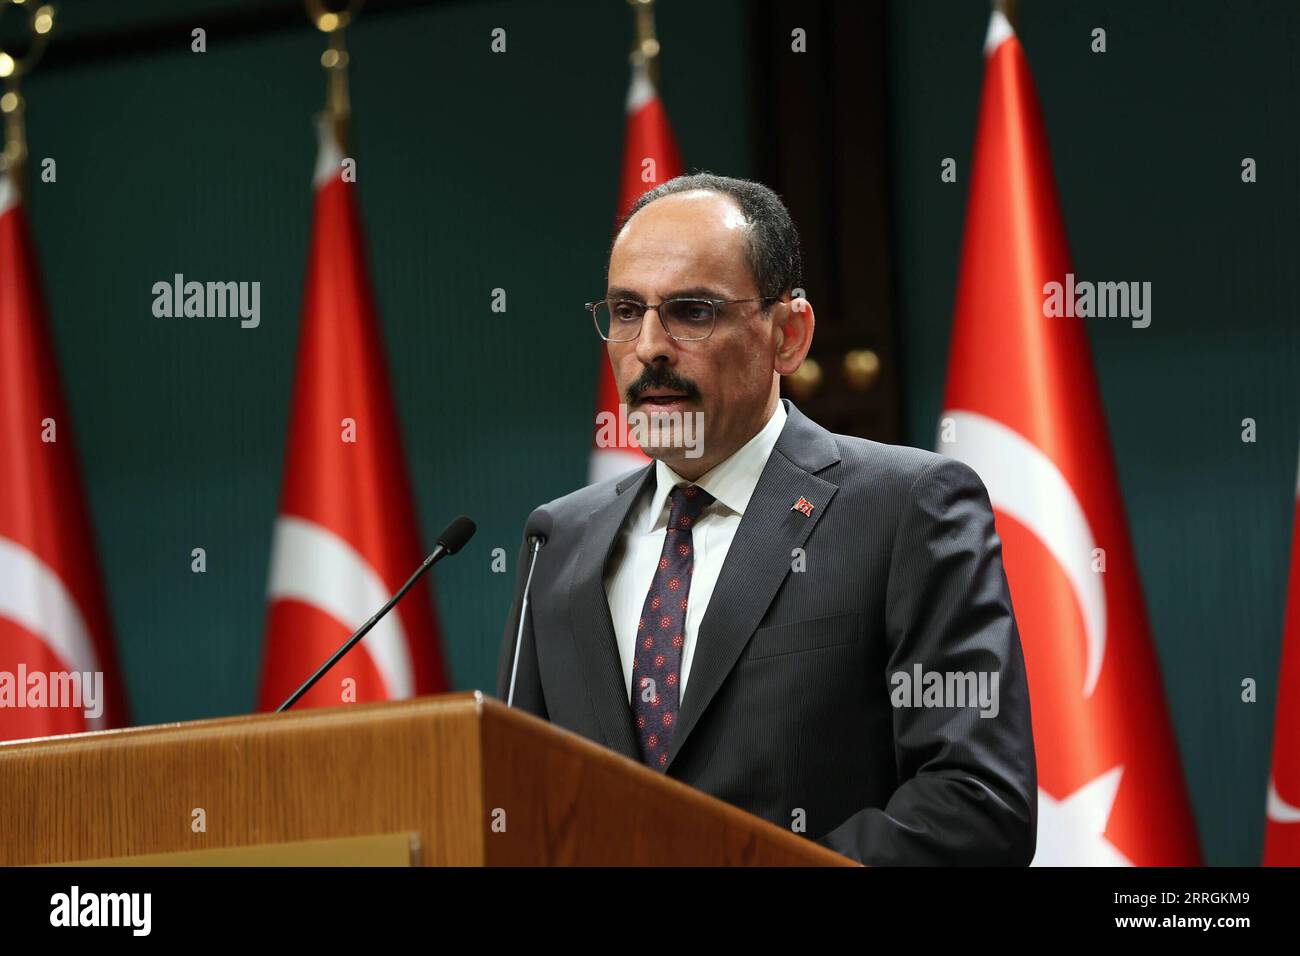 220525 -- ANKARA, May 25, 2022 -- Turkish presidential spokesperson Ibrahim Kalin speaks at a press conference after Turkey s talks with Sweden and Finland in Ankara, Turkey, on May 25, 2022. Turkey has set out conditions for the Swedish and Finnish delegations to earn its support over the two Nordic countries bids to join the North Atlantic Treaty Organization NATO, Turkish presidential spokesperson Ibrahim Kalin said on Wednesday. TURKEY-ANKARA-SWEDEN-FINLAND-NATO MEMBERSHIP-TALKS XinxHua PUBLICATIONxNOTxINxCHN Stock Photo